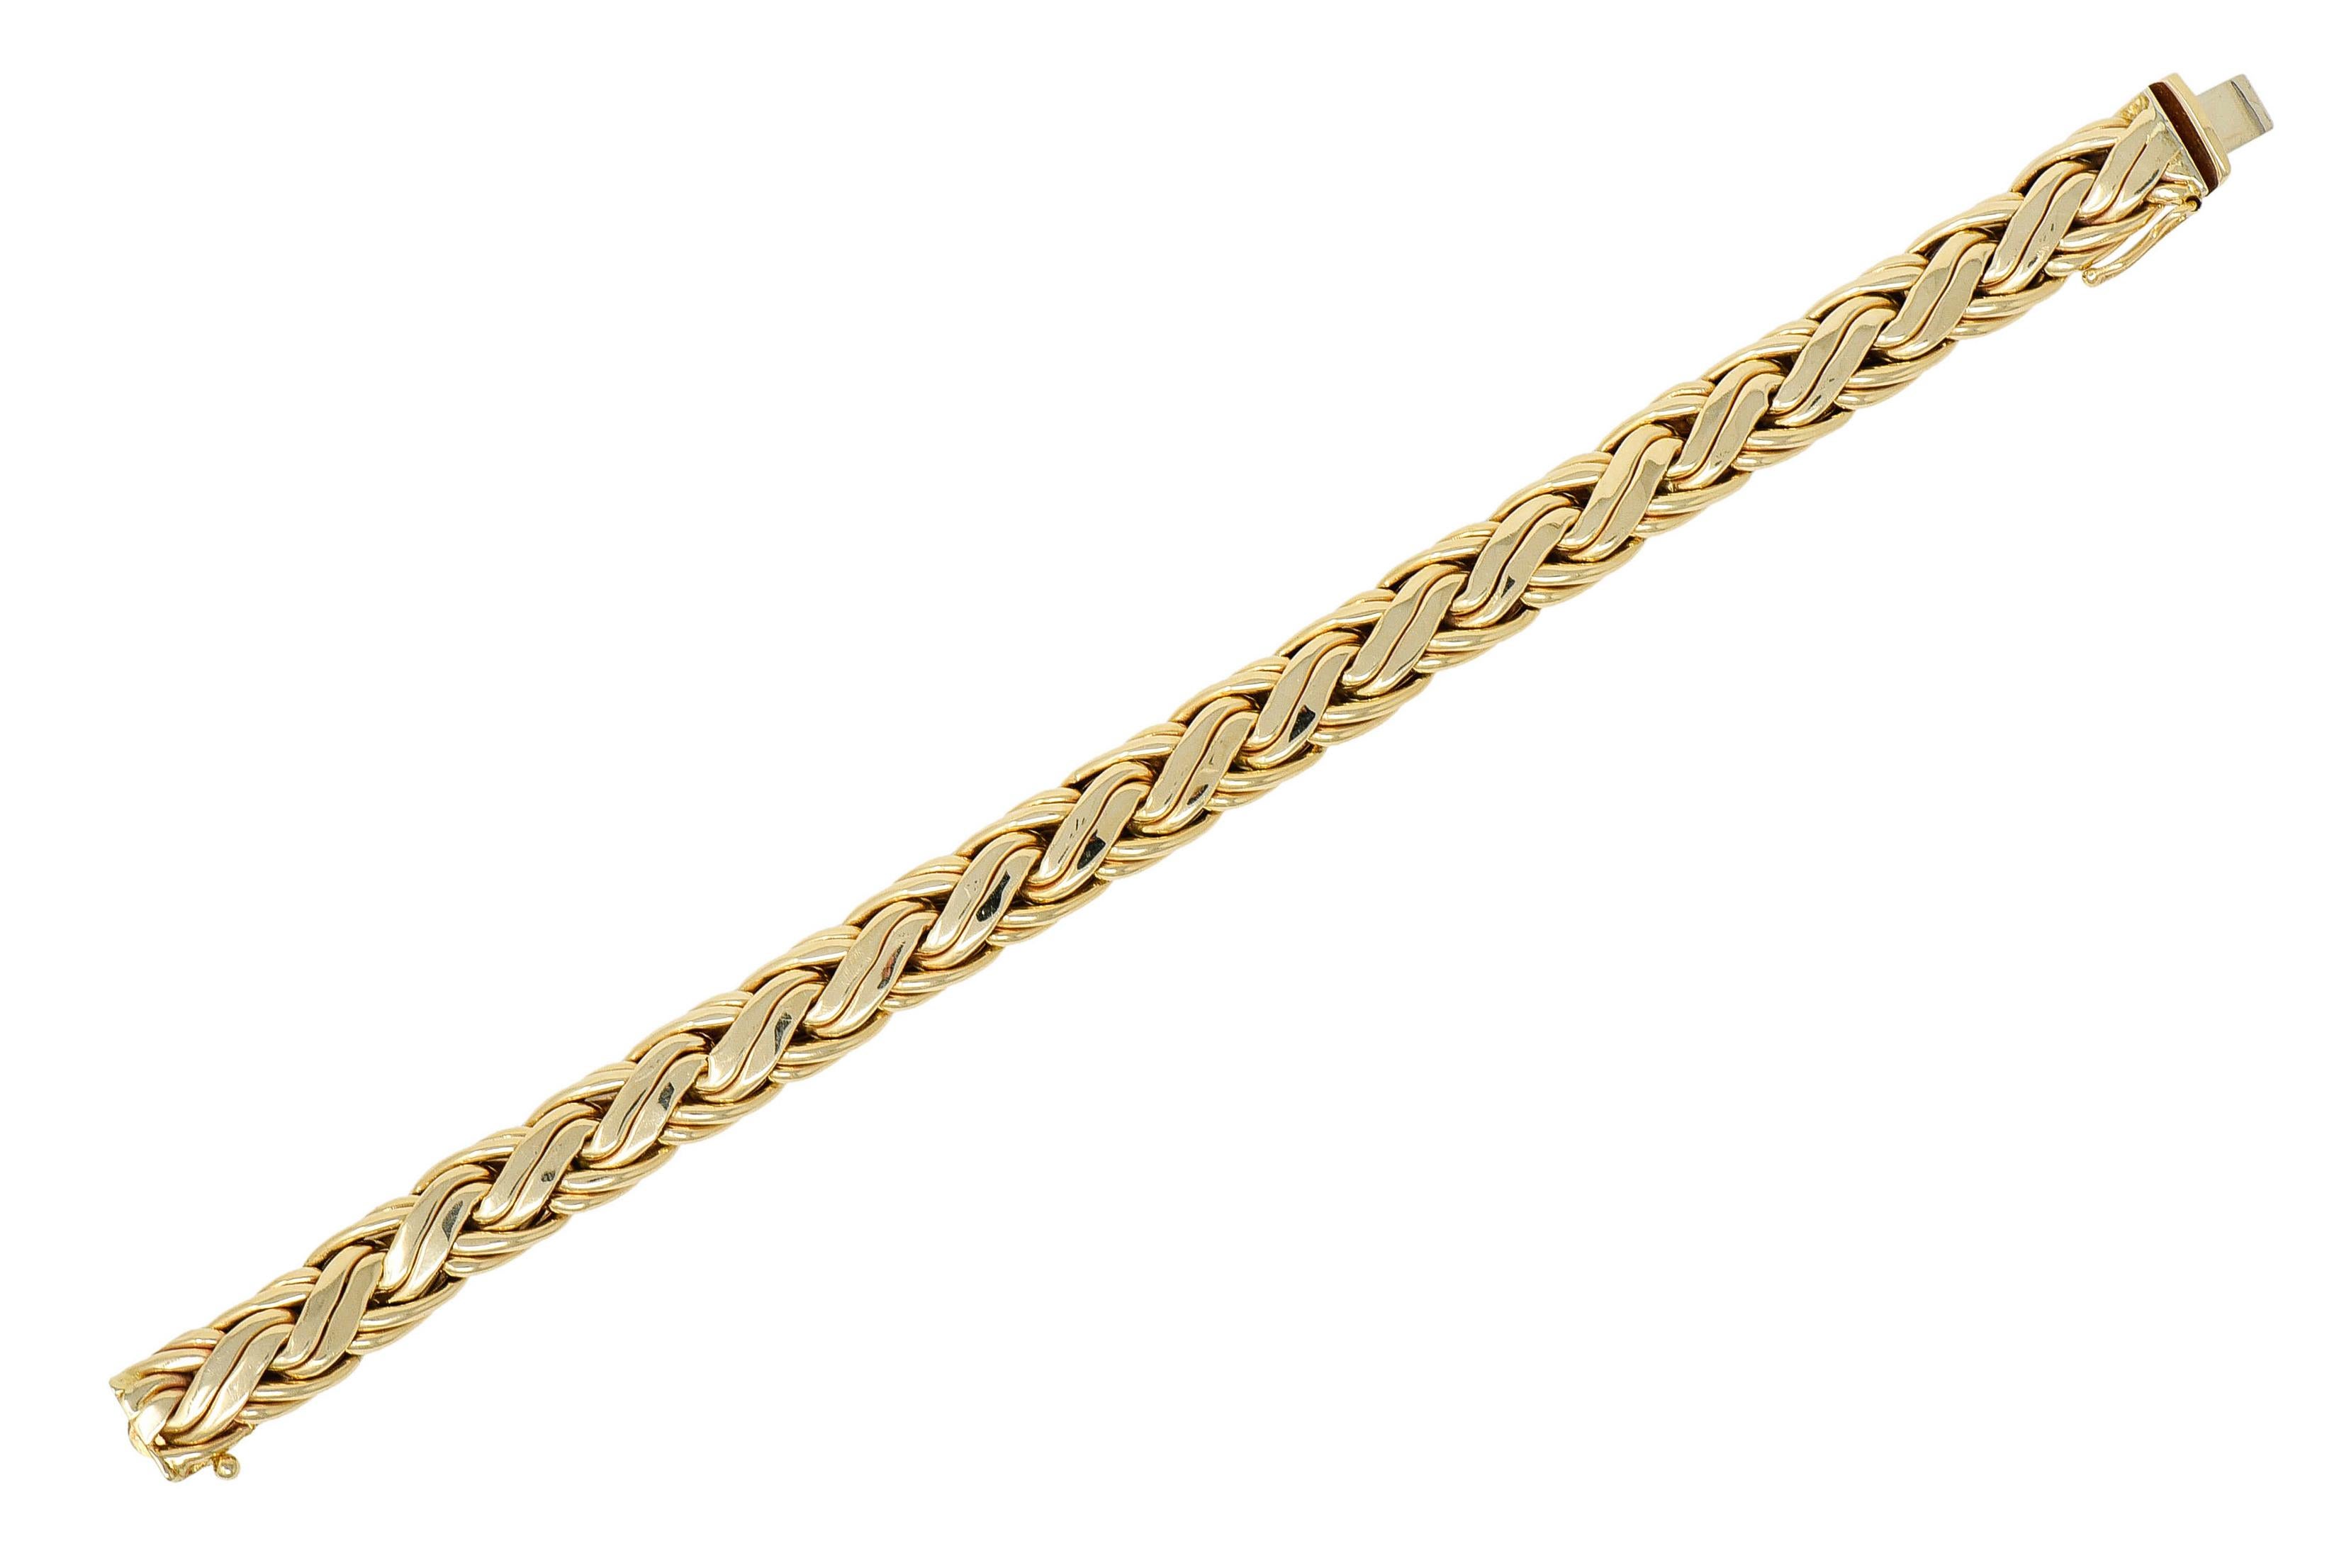 Designed as a woven chain bracelet

With polished gold S style links

Completed by a concealed clasp with figure eight safety

Fully signed Tiffany & Co.

Stamped 585 for 14 karat gold

Circa: 1970s

Length: 7 1/2 inches

Width: 3/8 inch

Total